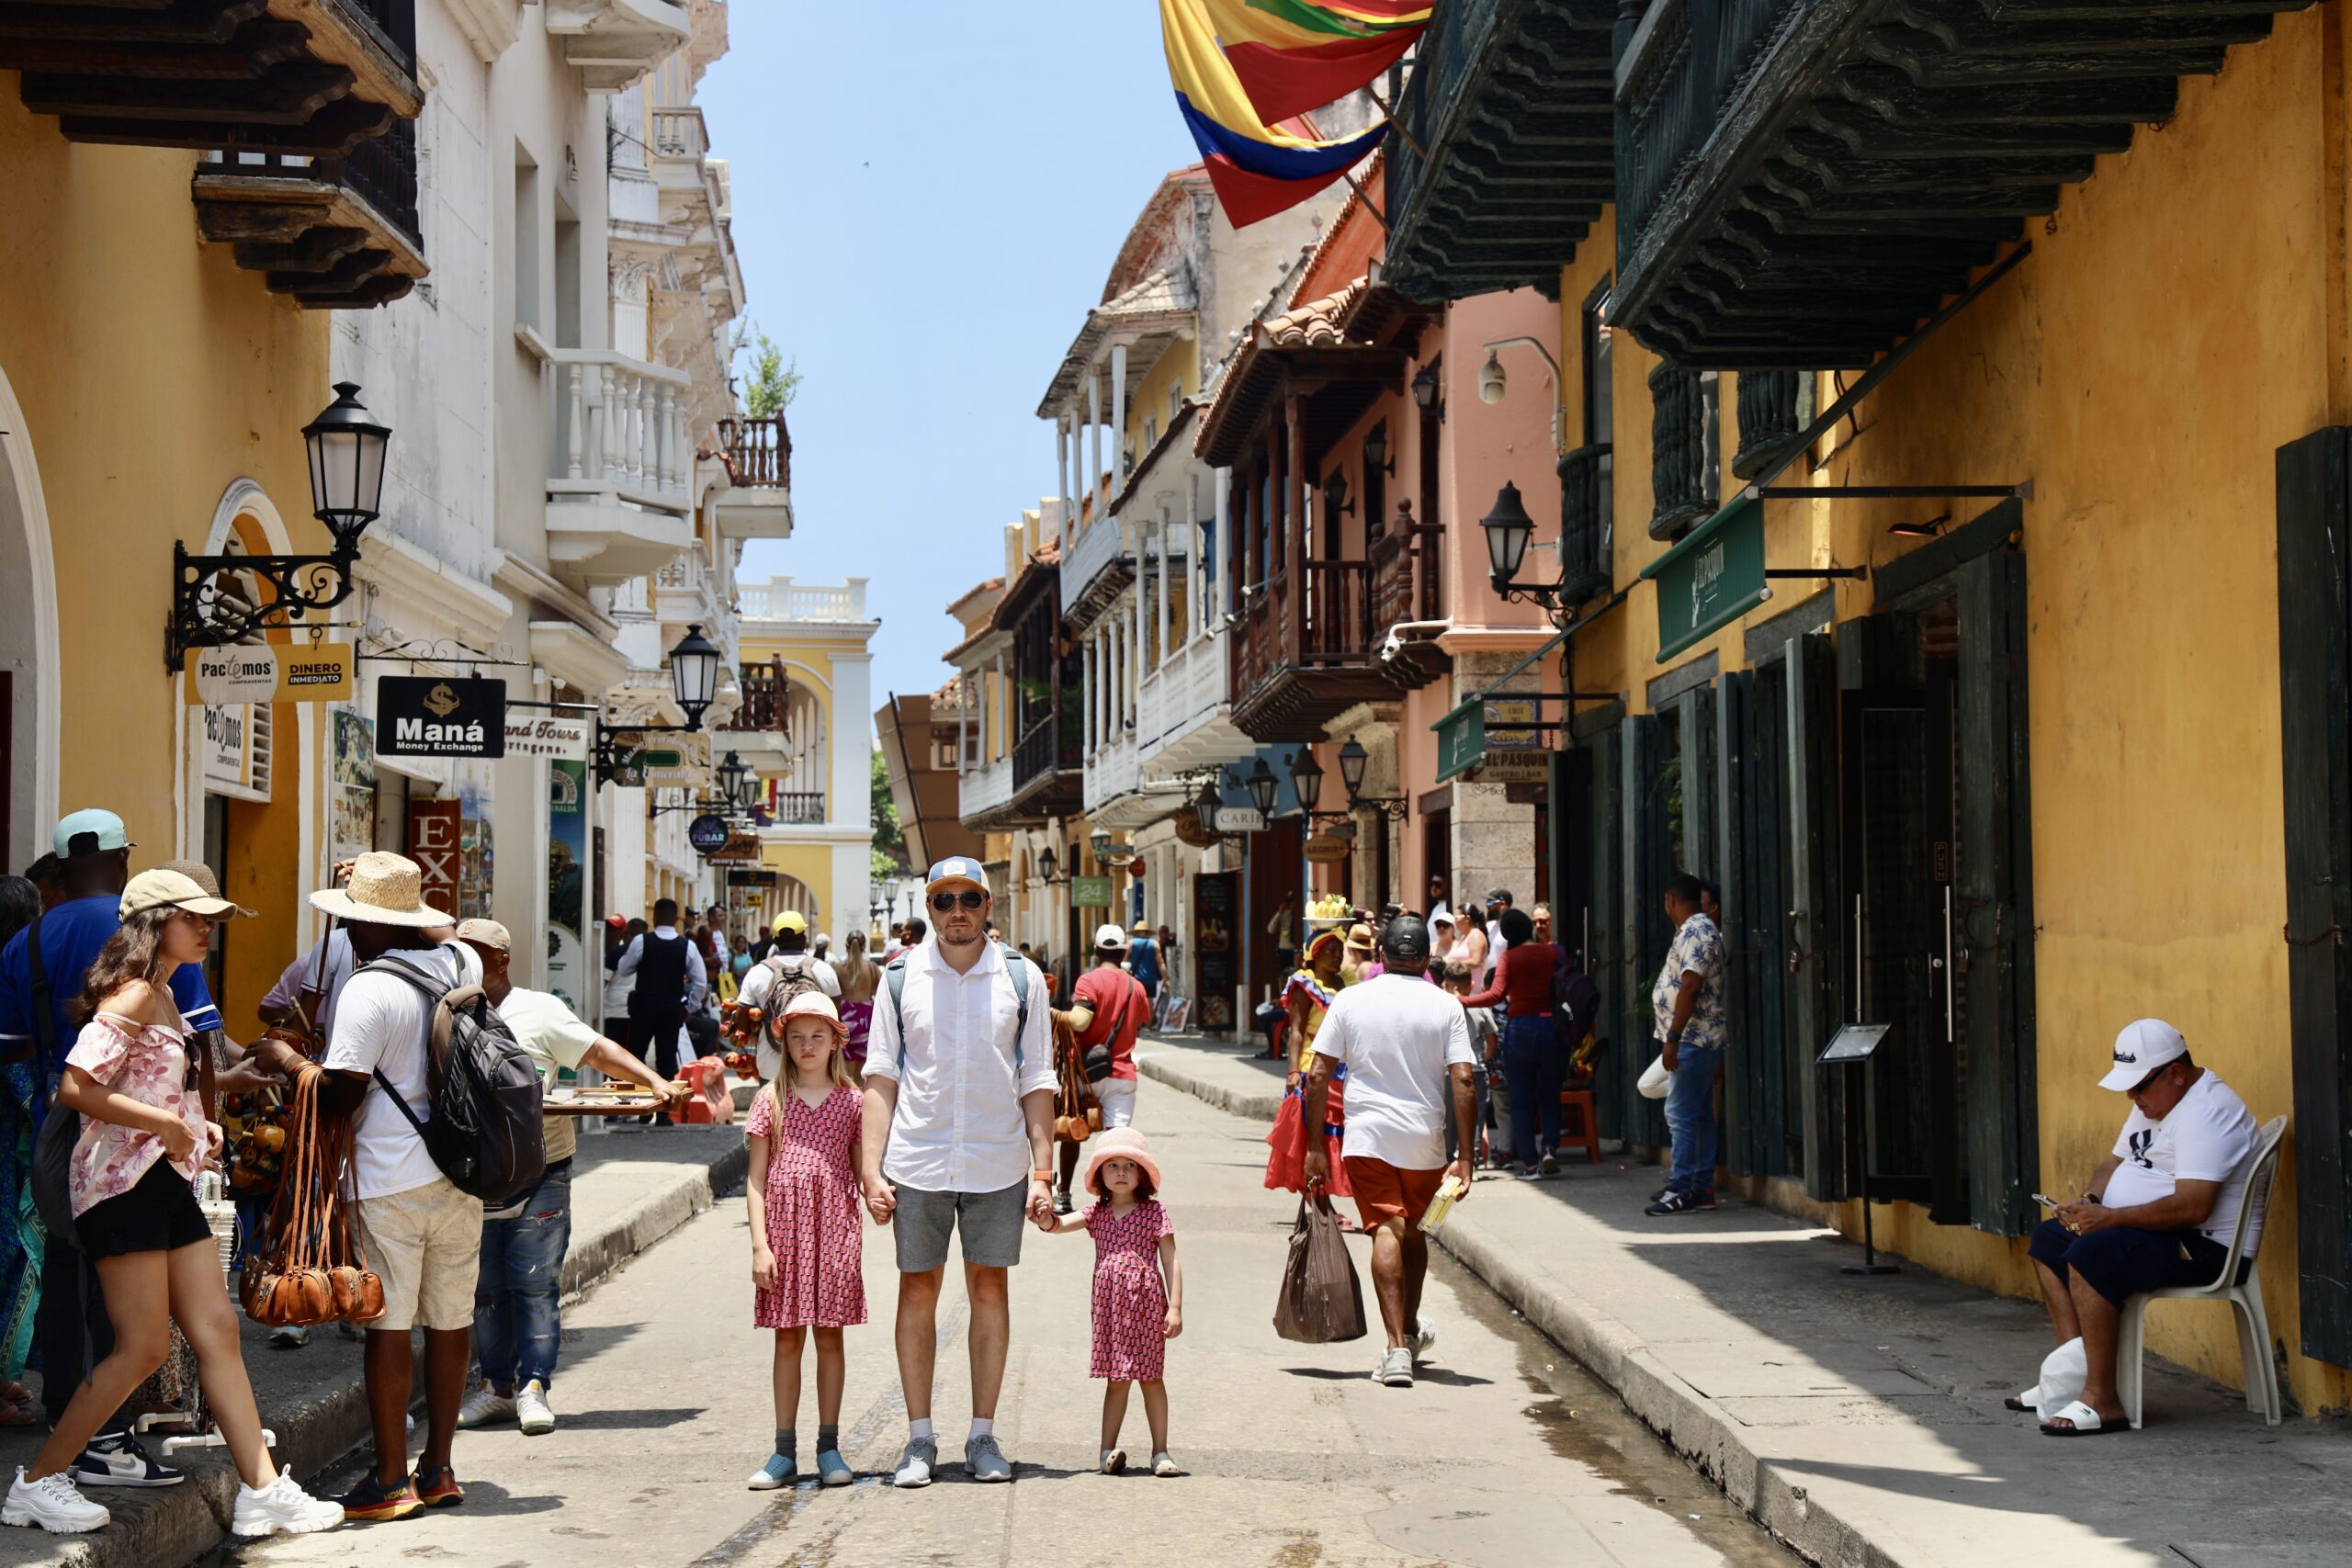 Streets of the Walled Town, Cartagena, Colombia